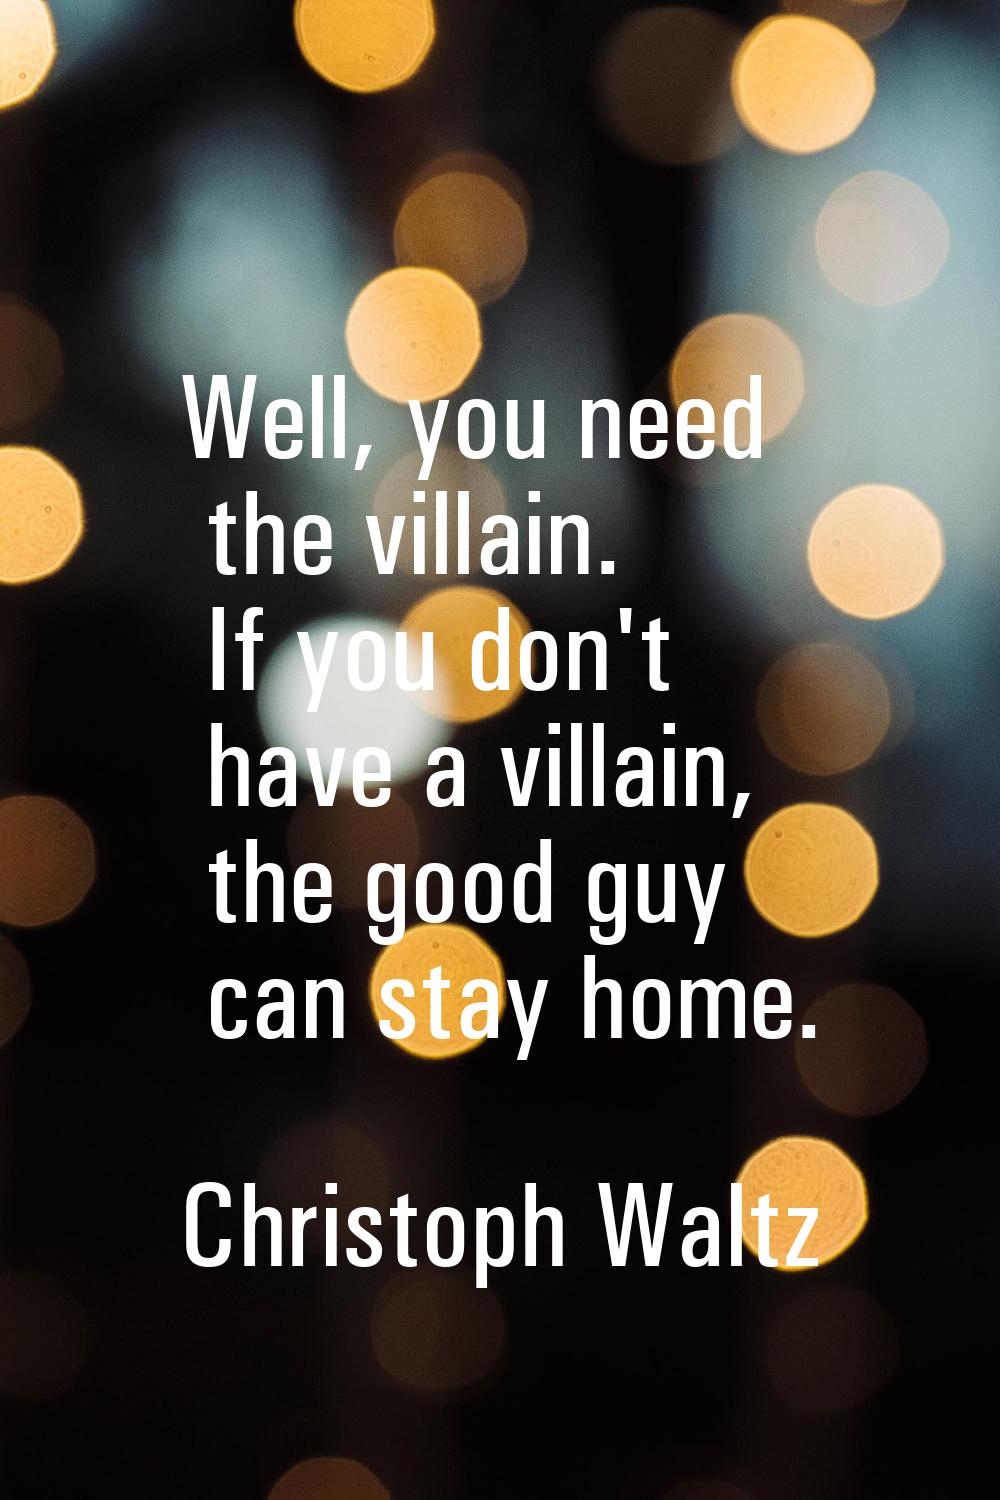 Well, you need the villain. If you don't have a villain, the good guy can stay home.